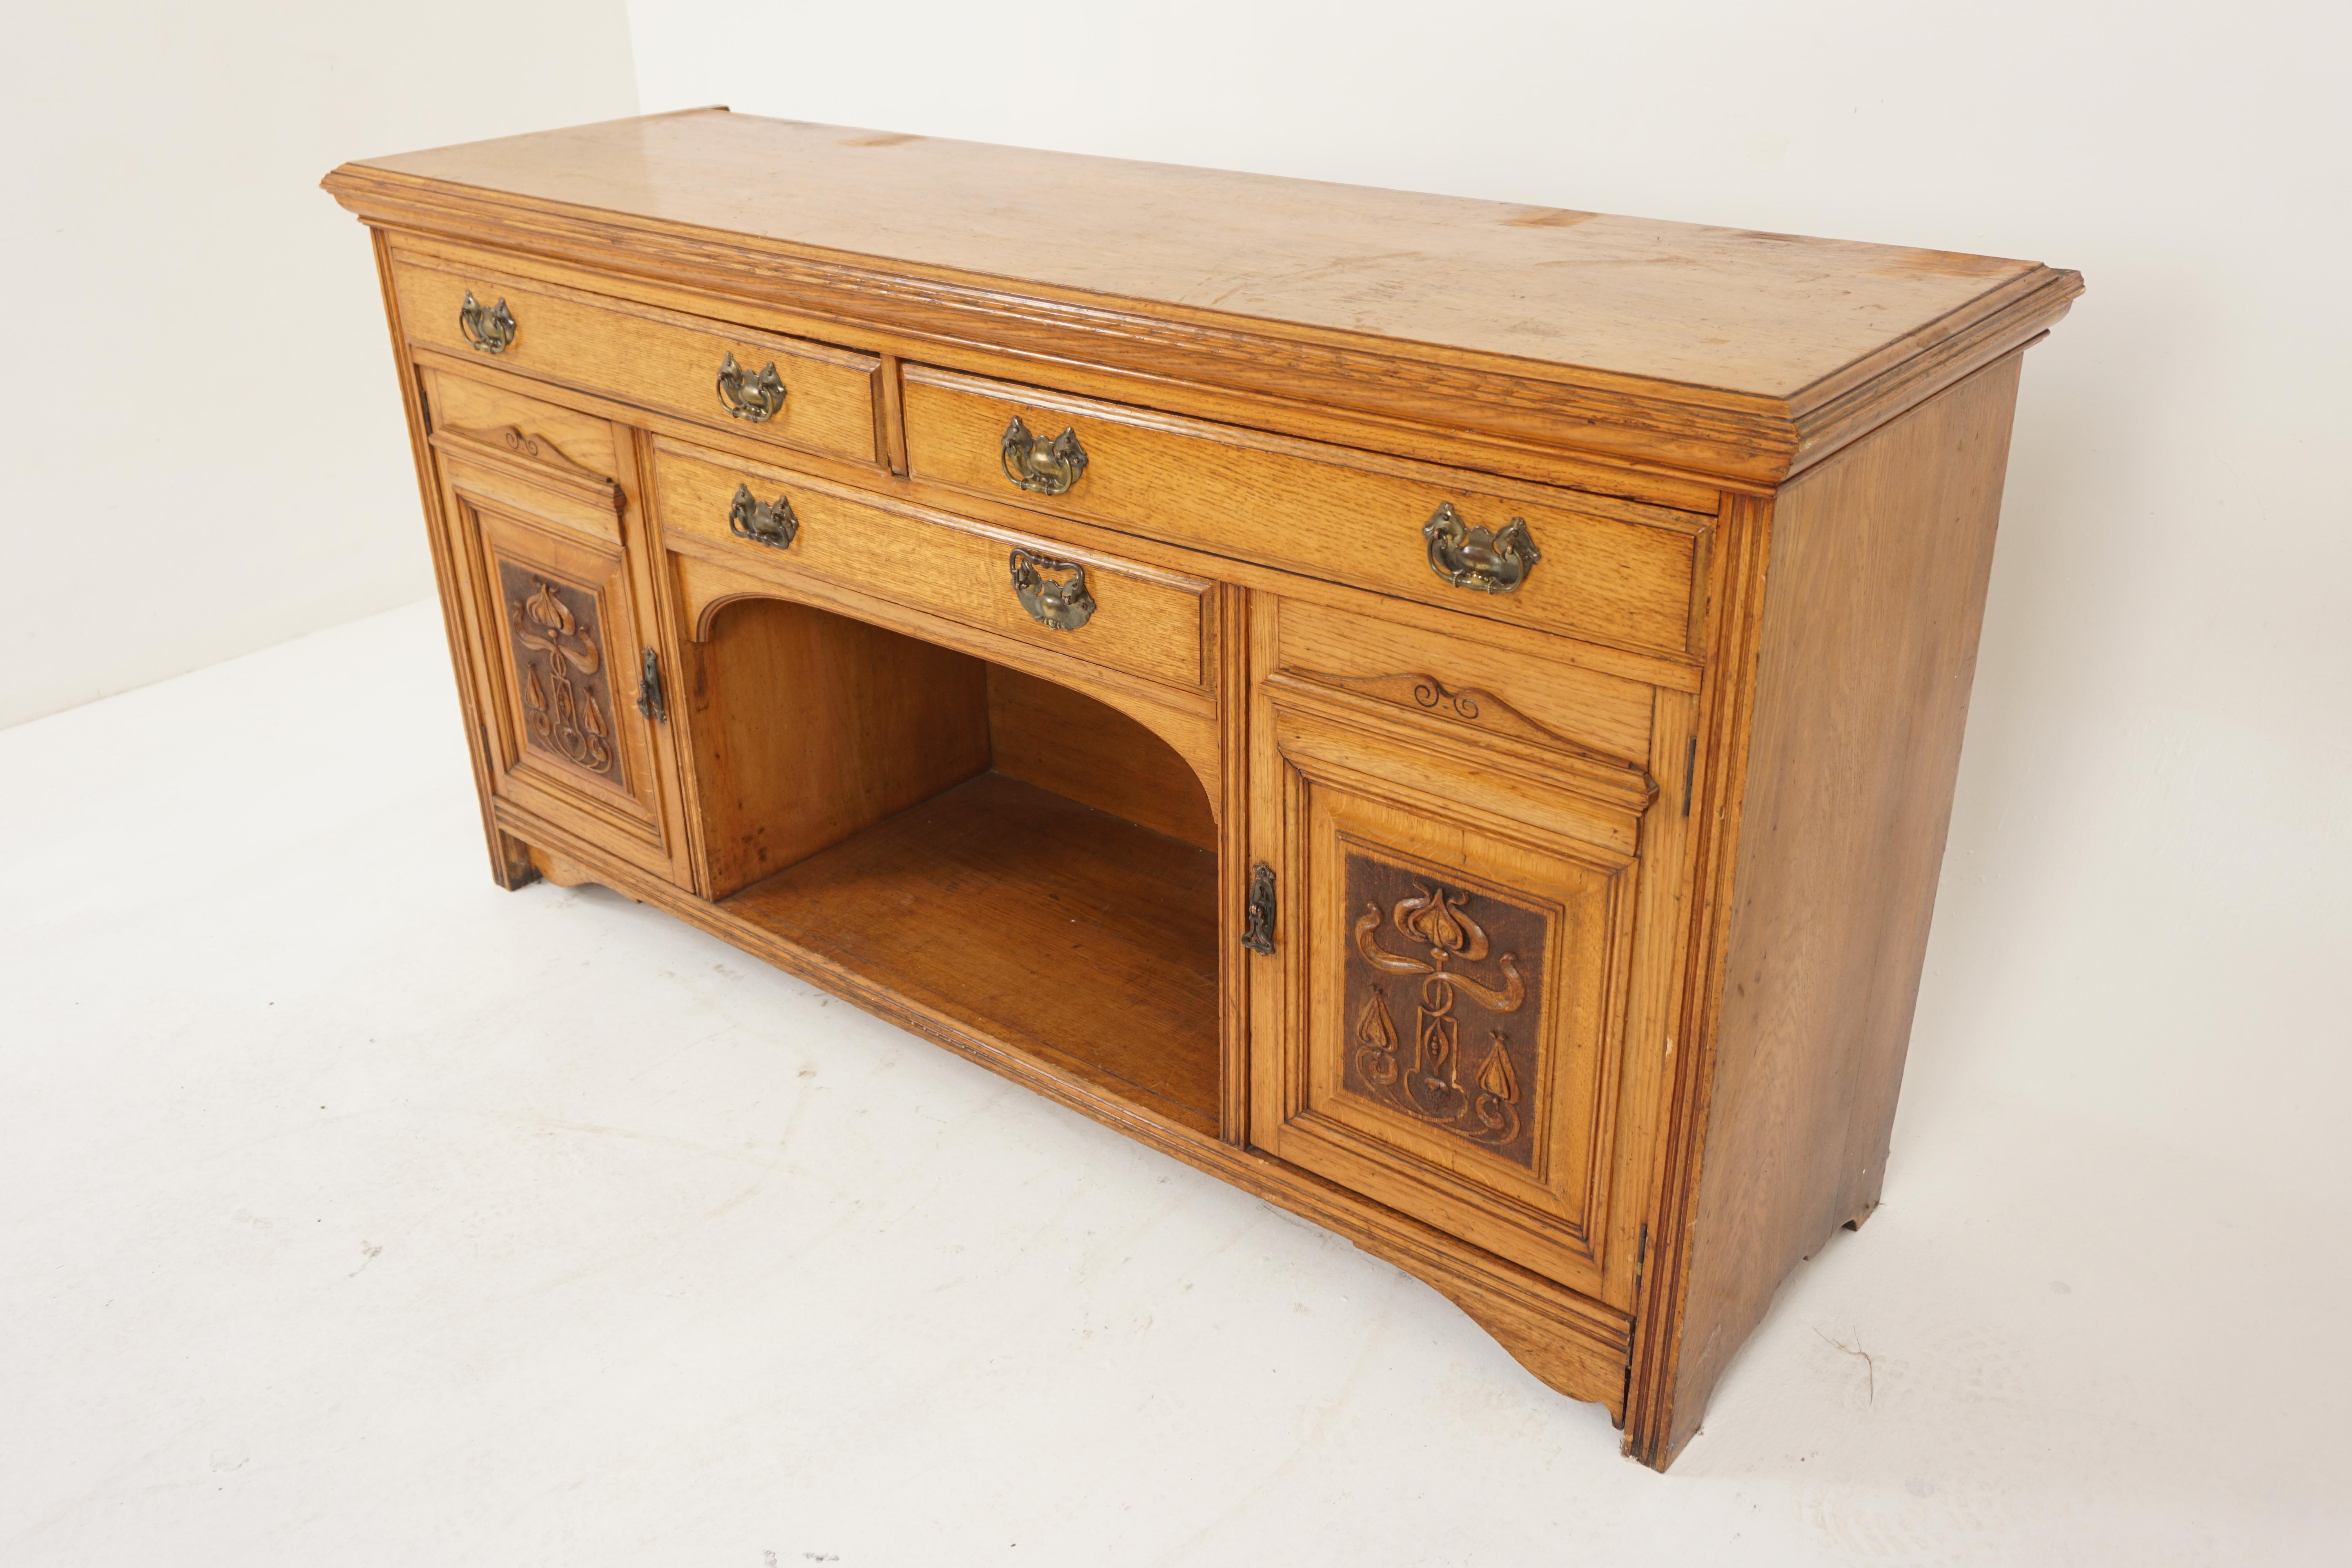 Antique Victorian Oak Sideboard, Buffet, Chiffonier, Scotland 1890, H607 

Scotland 1890
Solid Oak
Original finish
Rectangular moulded top
Pair of long dovetailed drawers with a shorter drawer below
All with original brass pulls
Beneath the bottom